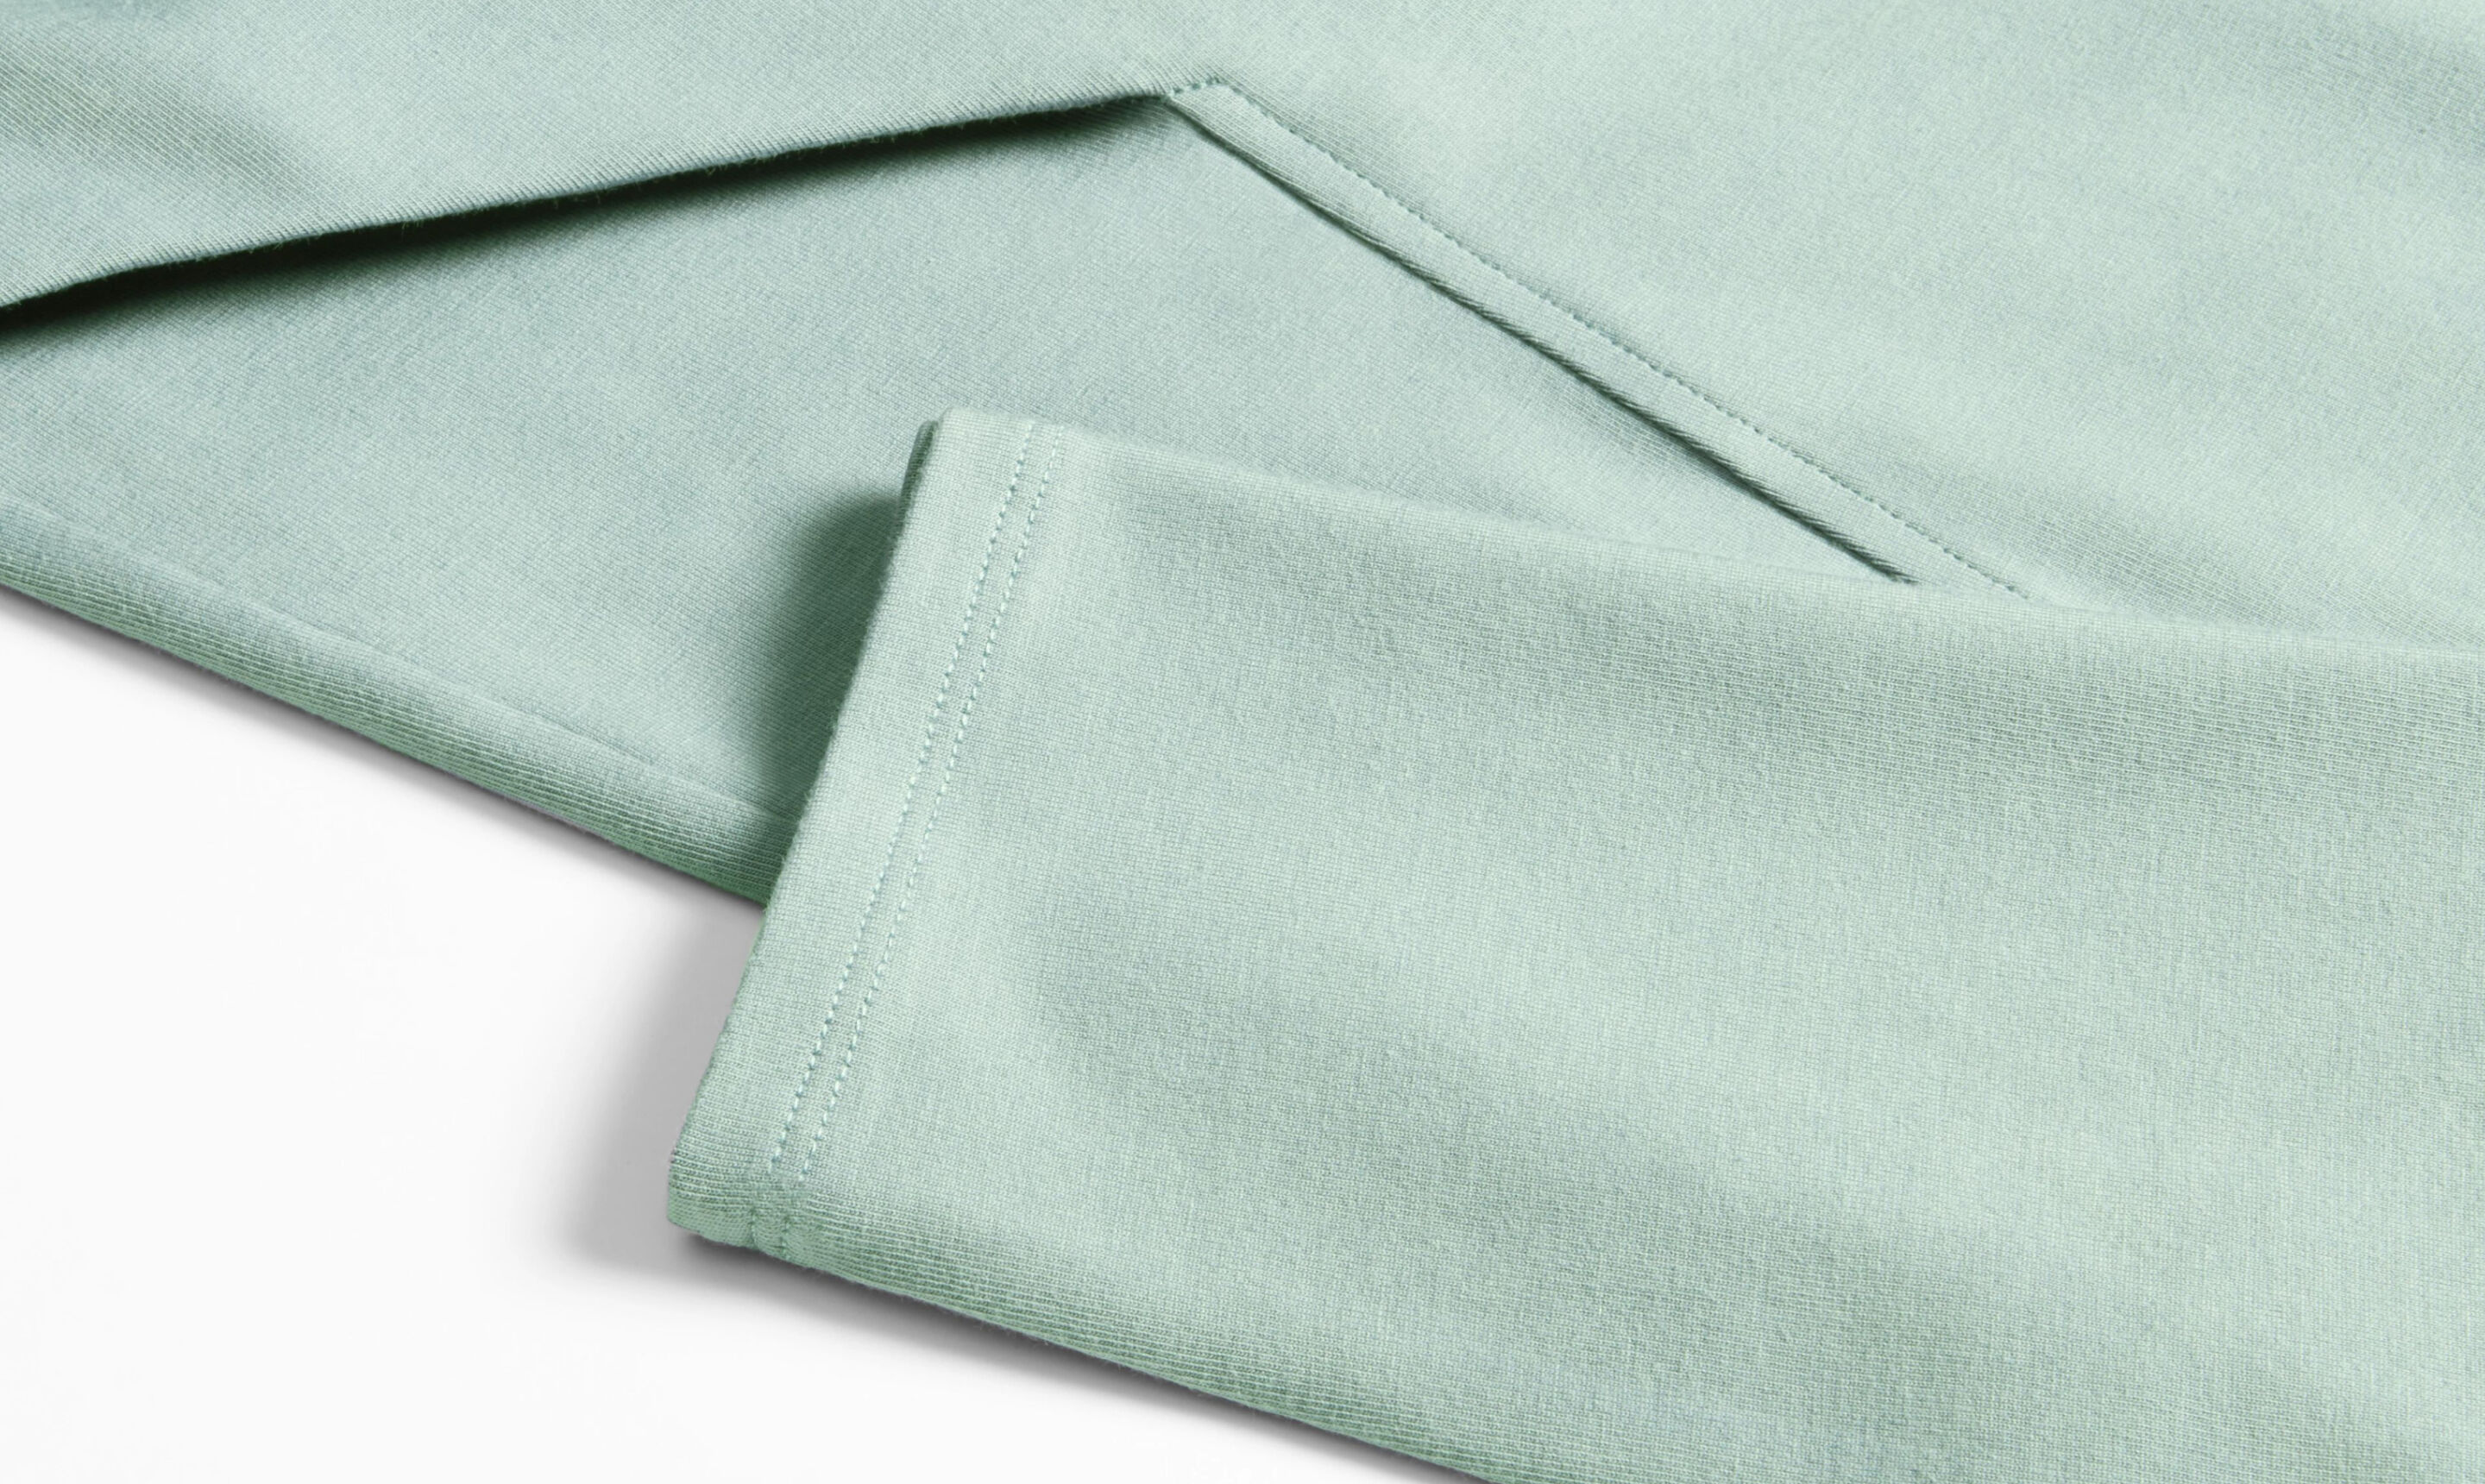 Folded clothing with seam detailing.